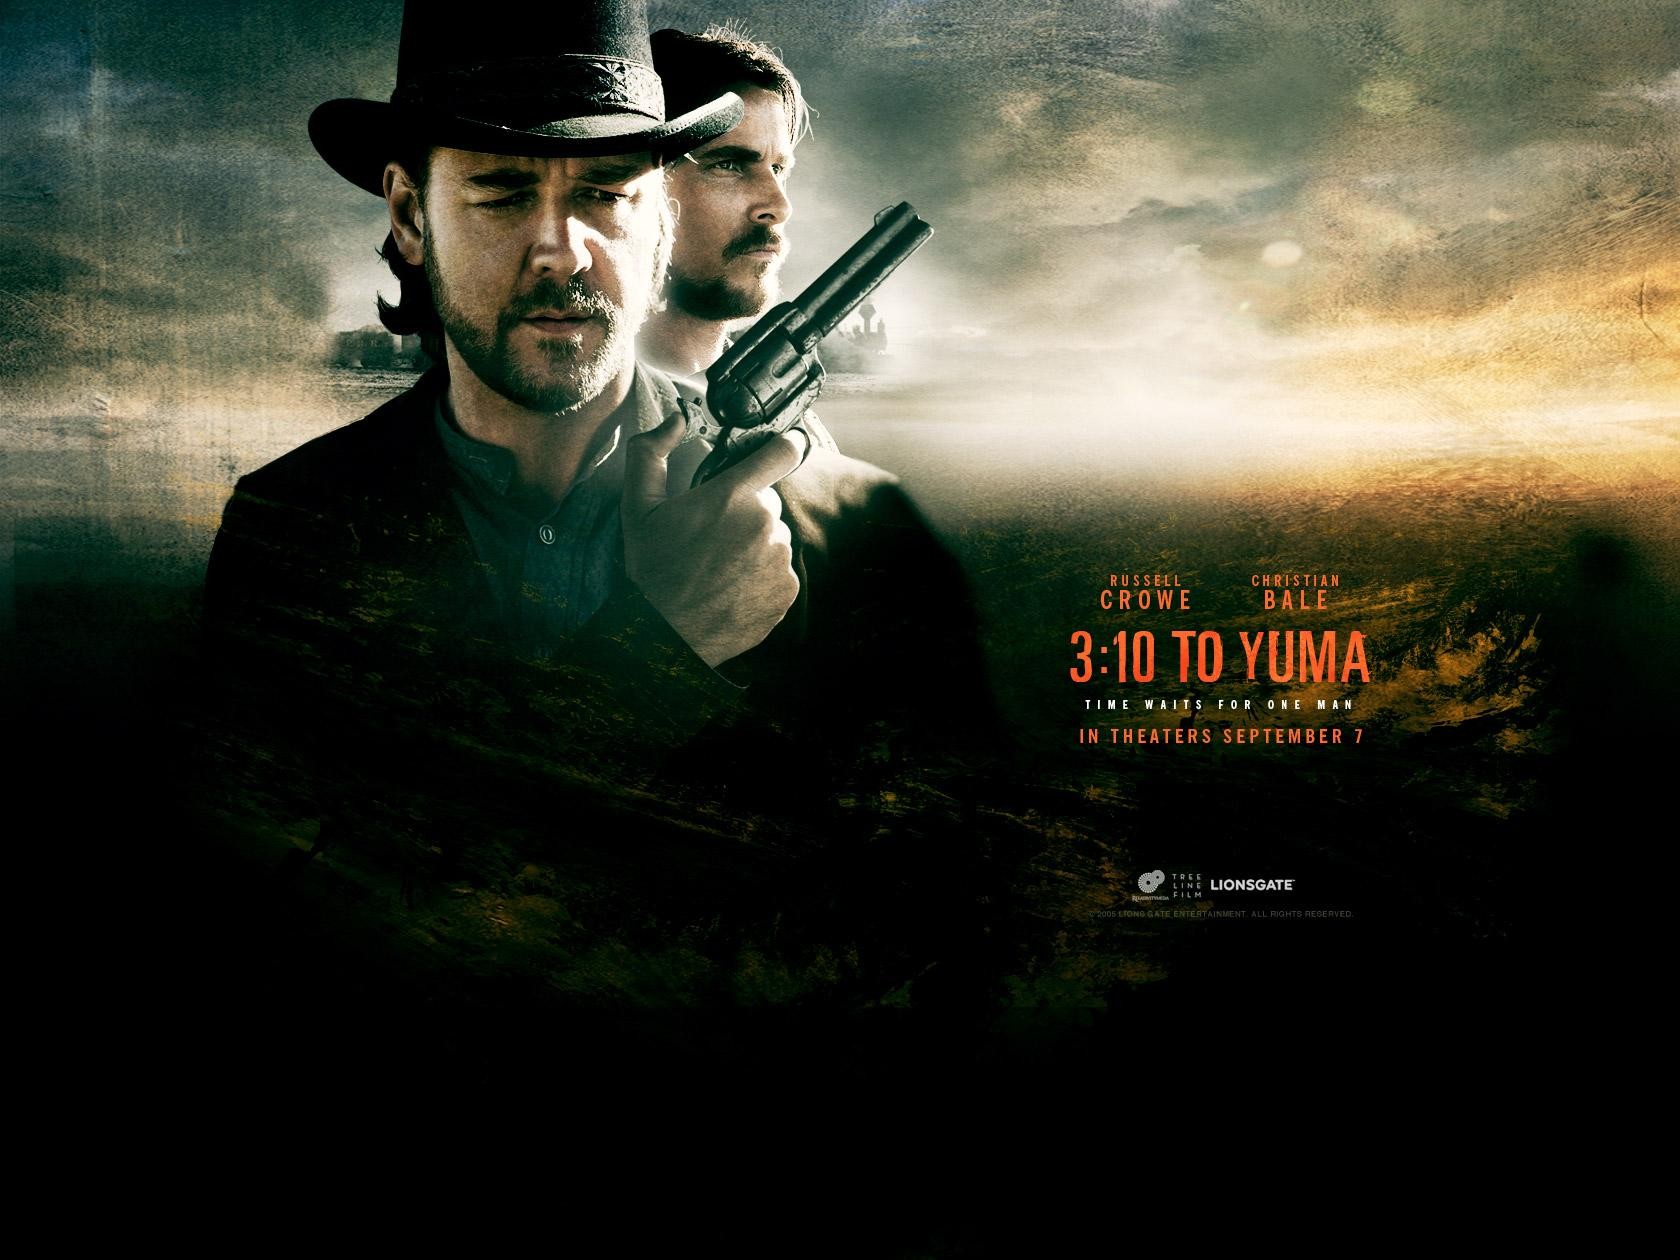 General 1680x1260 Russel Crowe Christian Bale 3:10 to Yuma movies revolver western